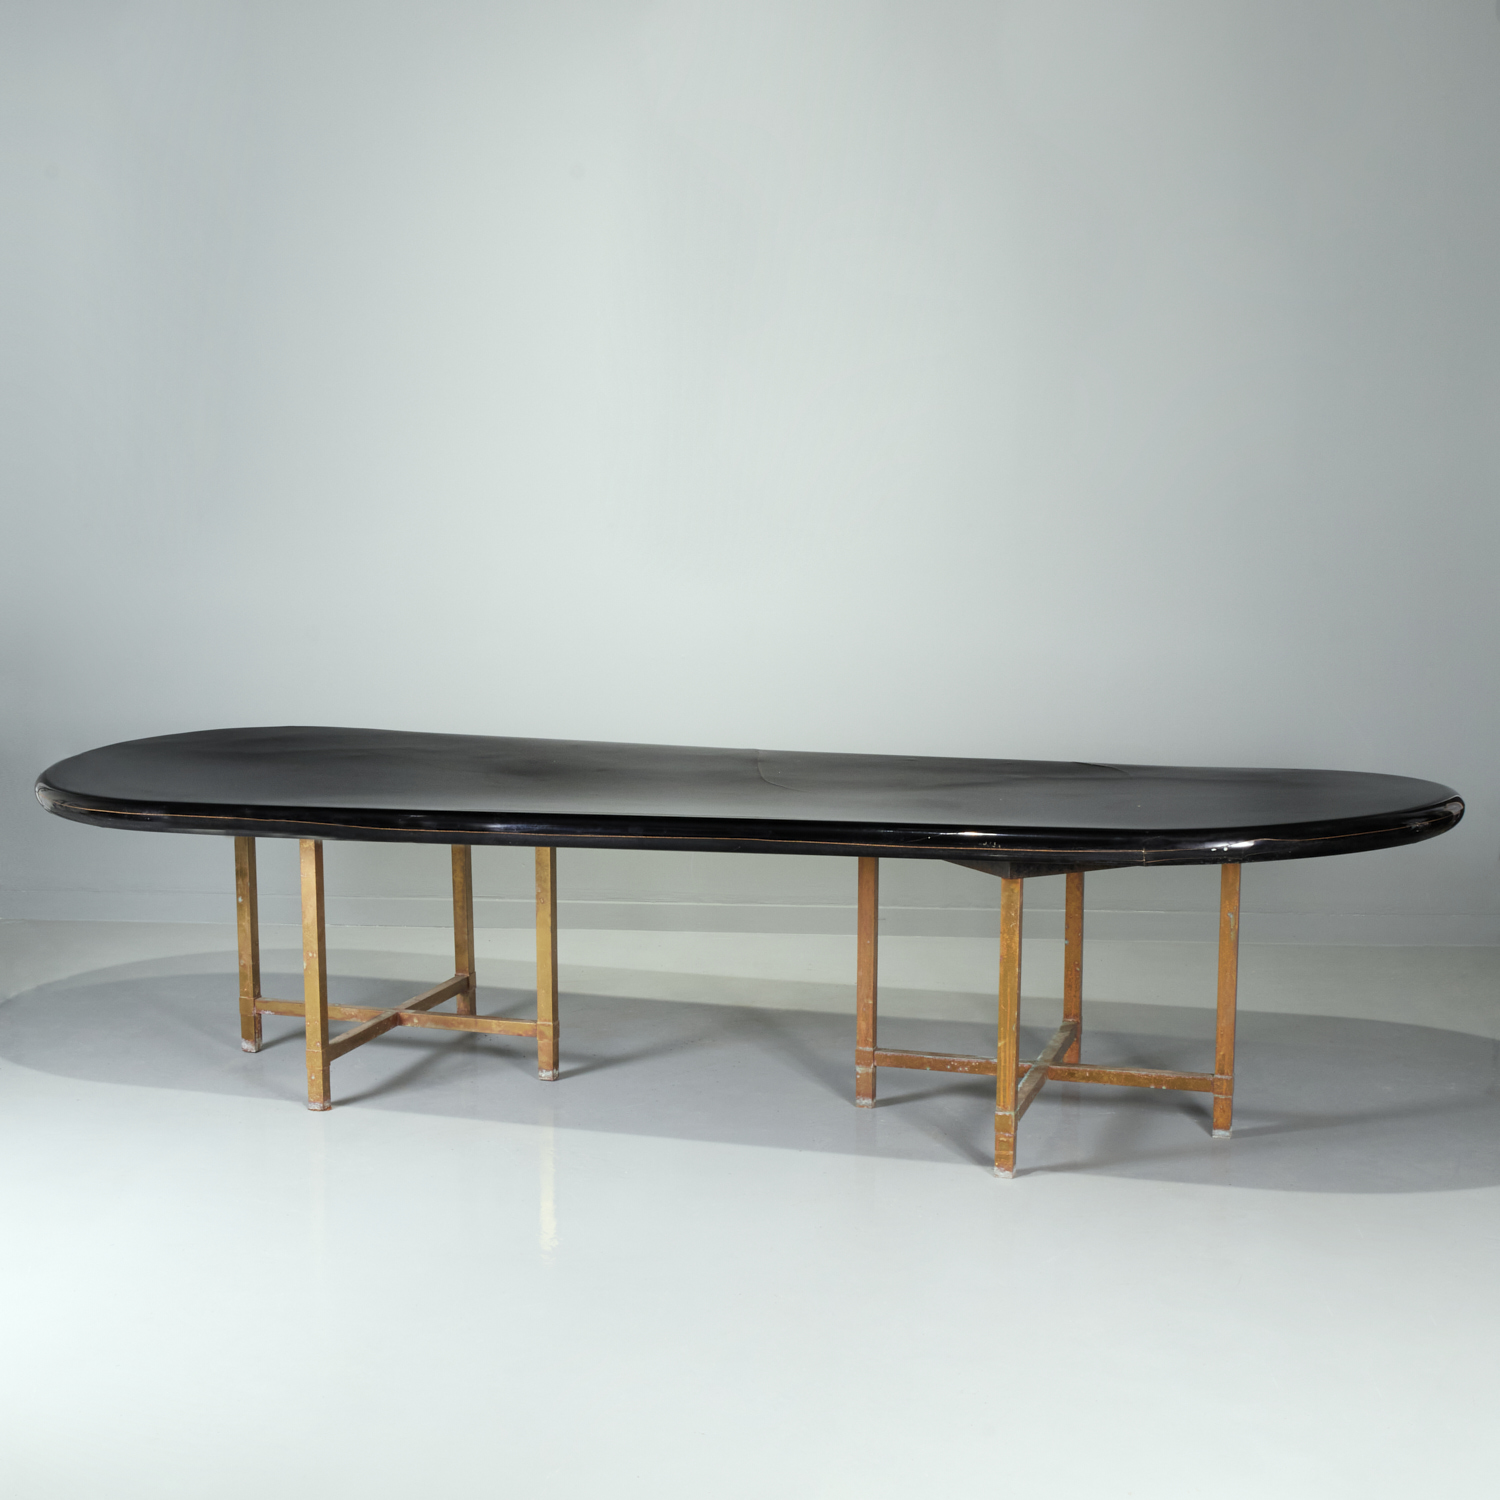 LARGE JANSEN STYLE DINING TABLE 360c80